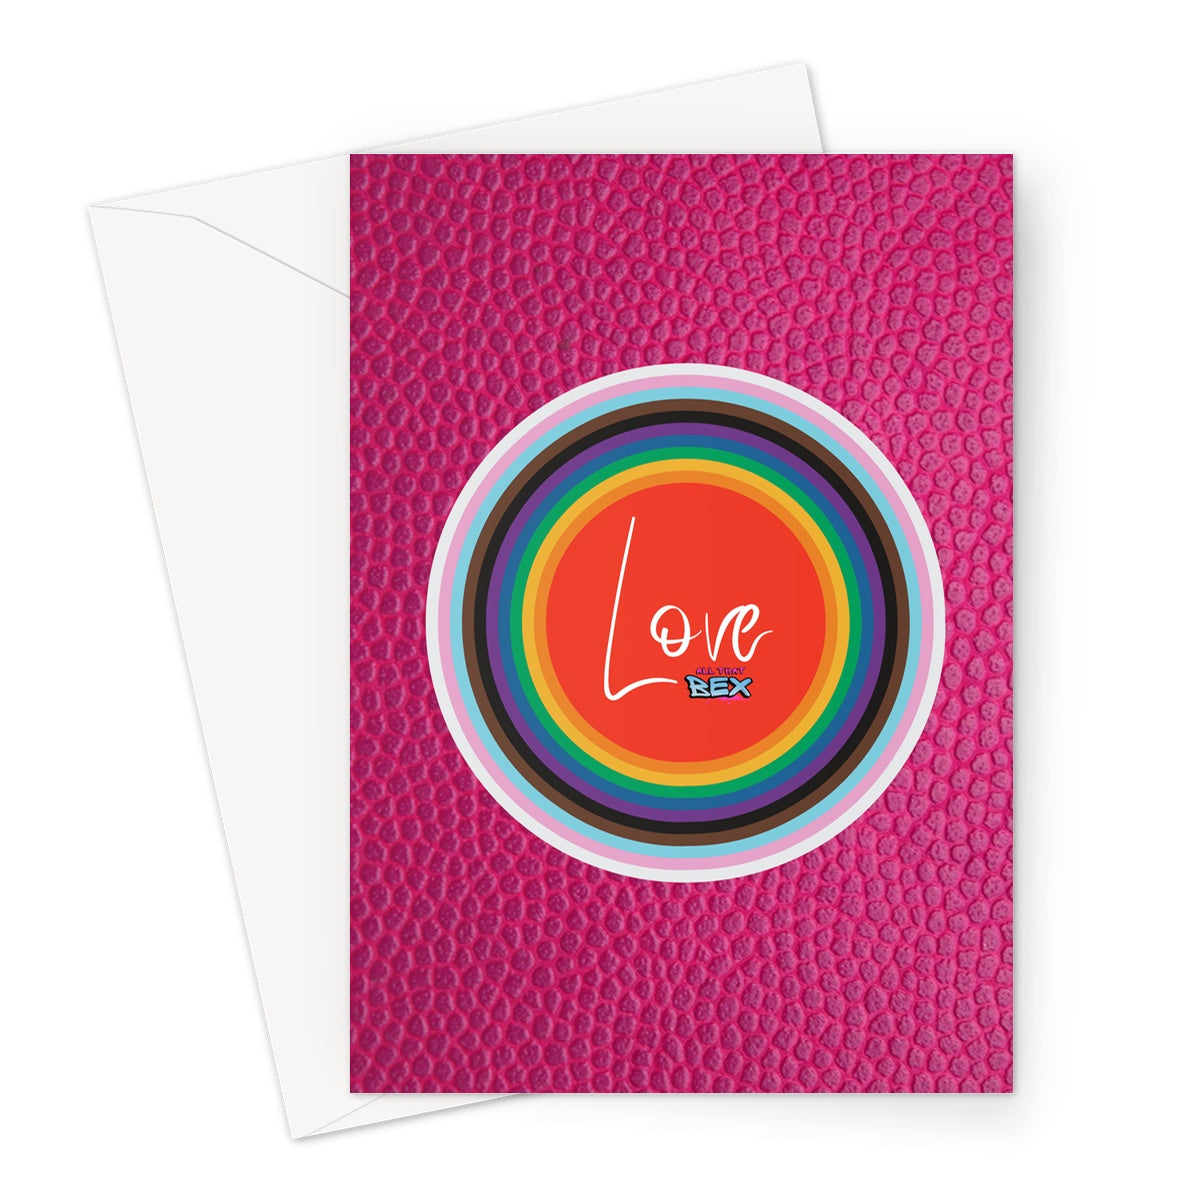 Blank greeting card with pink background. On the blank card are eleven different coloured circles on top of one another with the rim of each shown, similar to a target. The centre is red and has the word 'Love' written in a white. The All That Bex logo is next to it. The colours from inside out represent the LGBTQIA pride flag with the rainbow, black and brown, and trans pink, blue, and white.